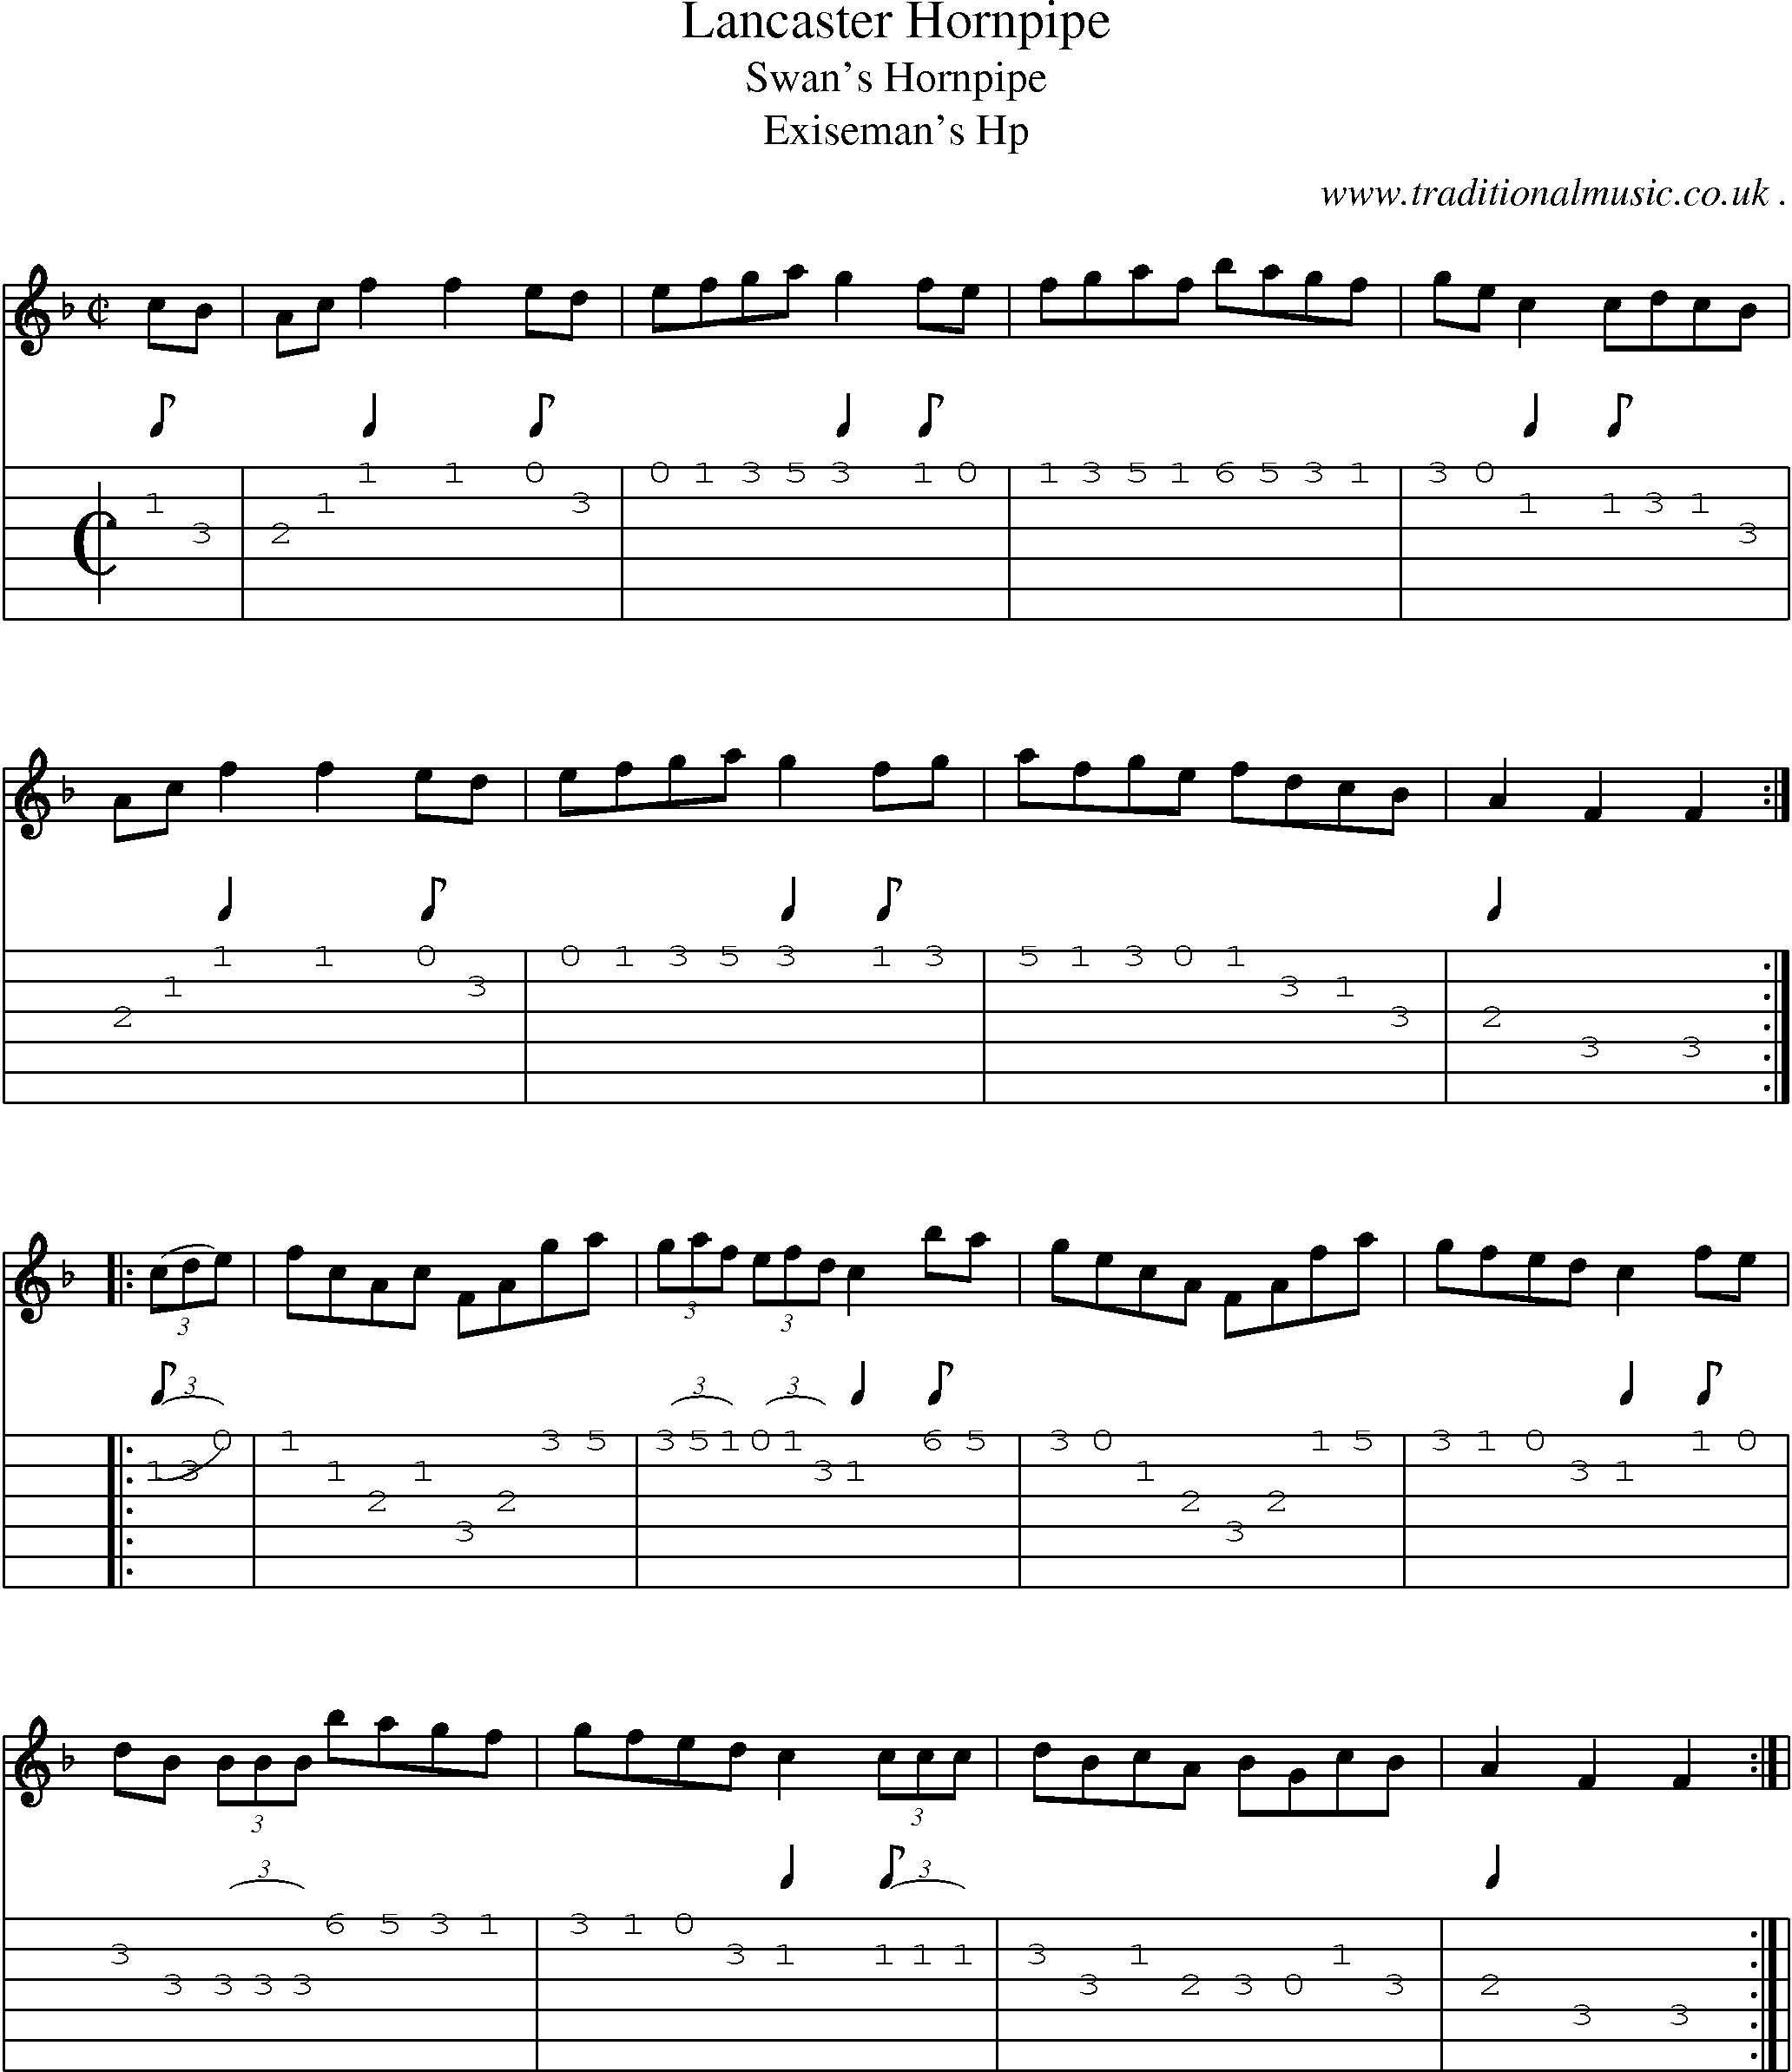 Sheet-Music and Guitar Tabs for Lancaster Hornpipe